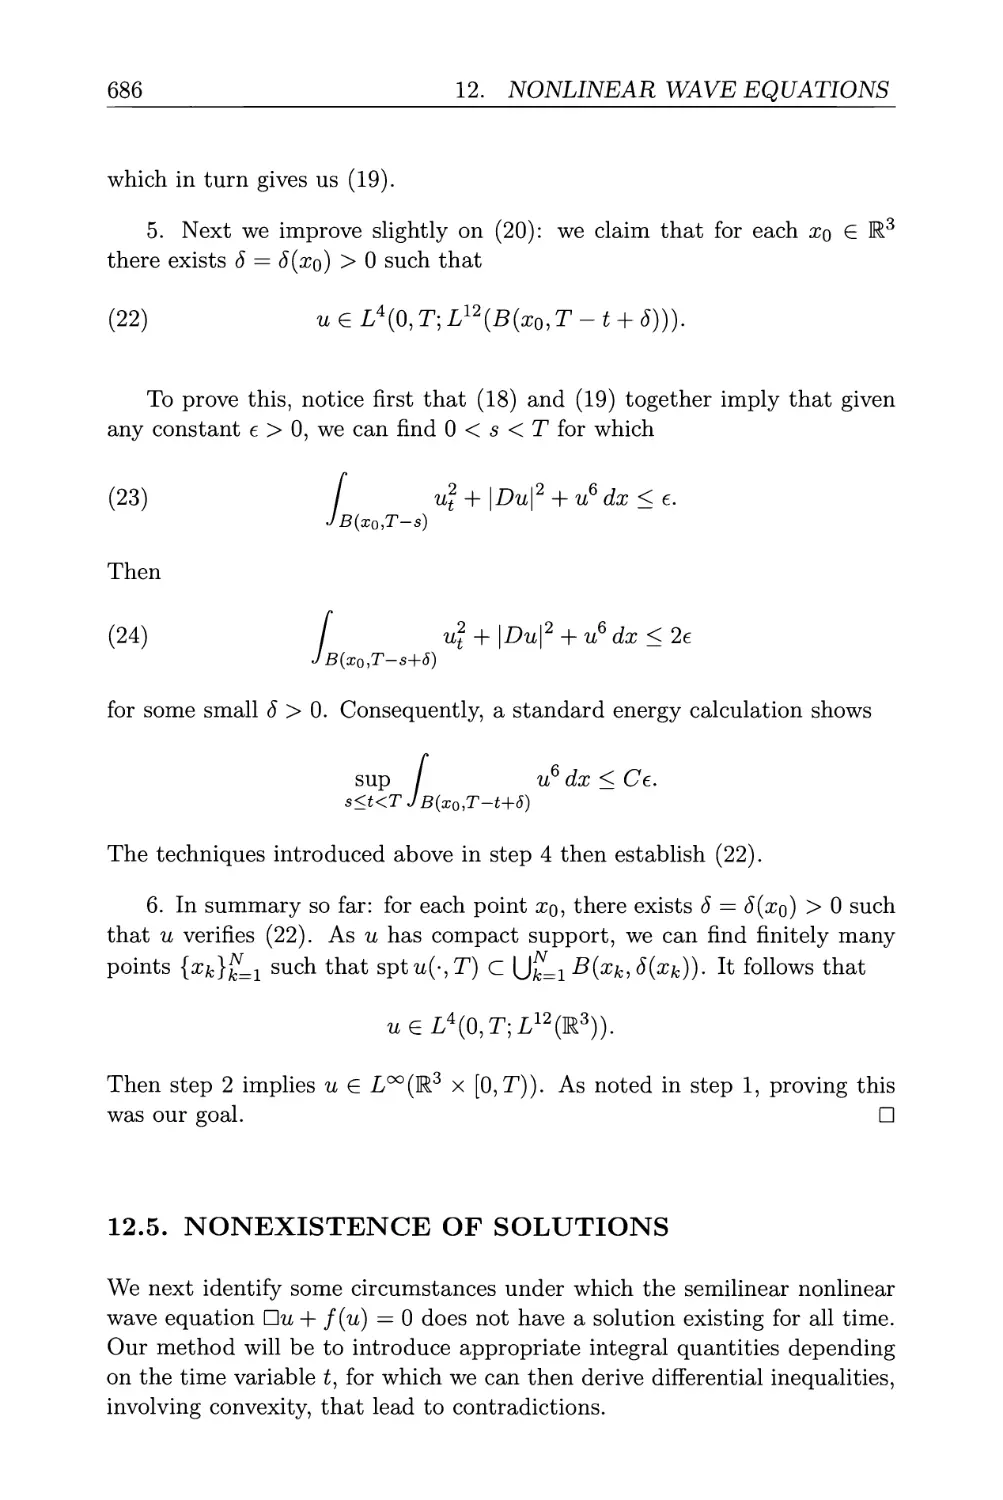 12.5. Nonexistence of solutions